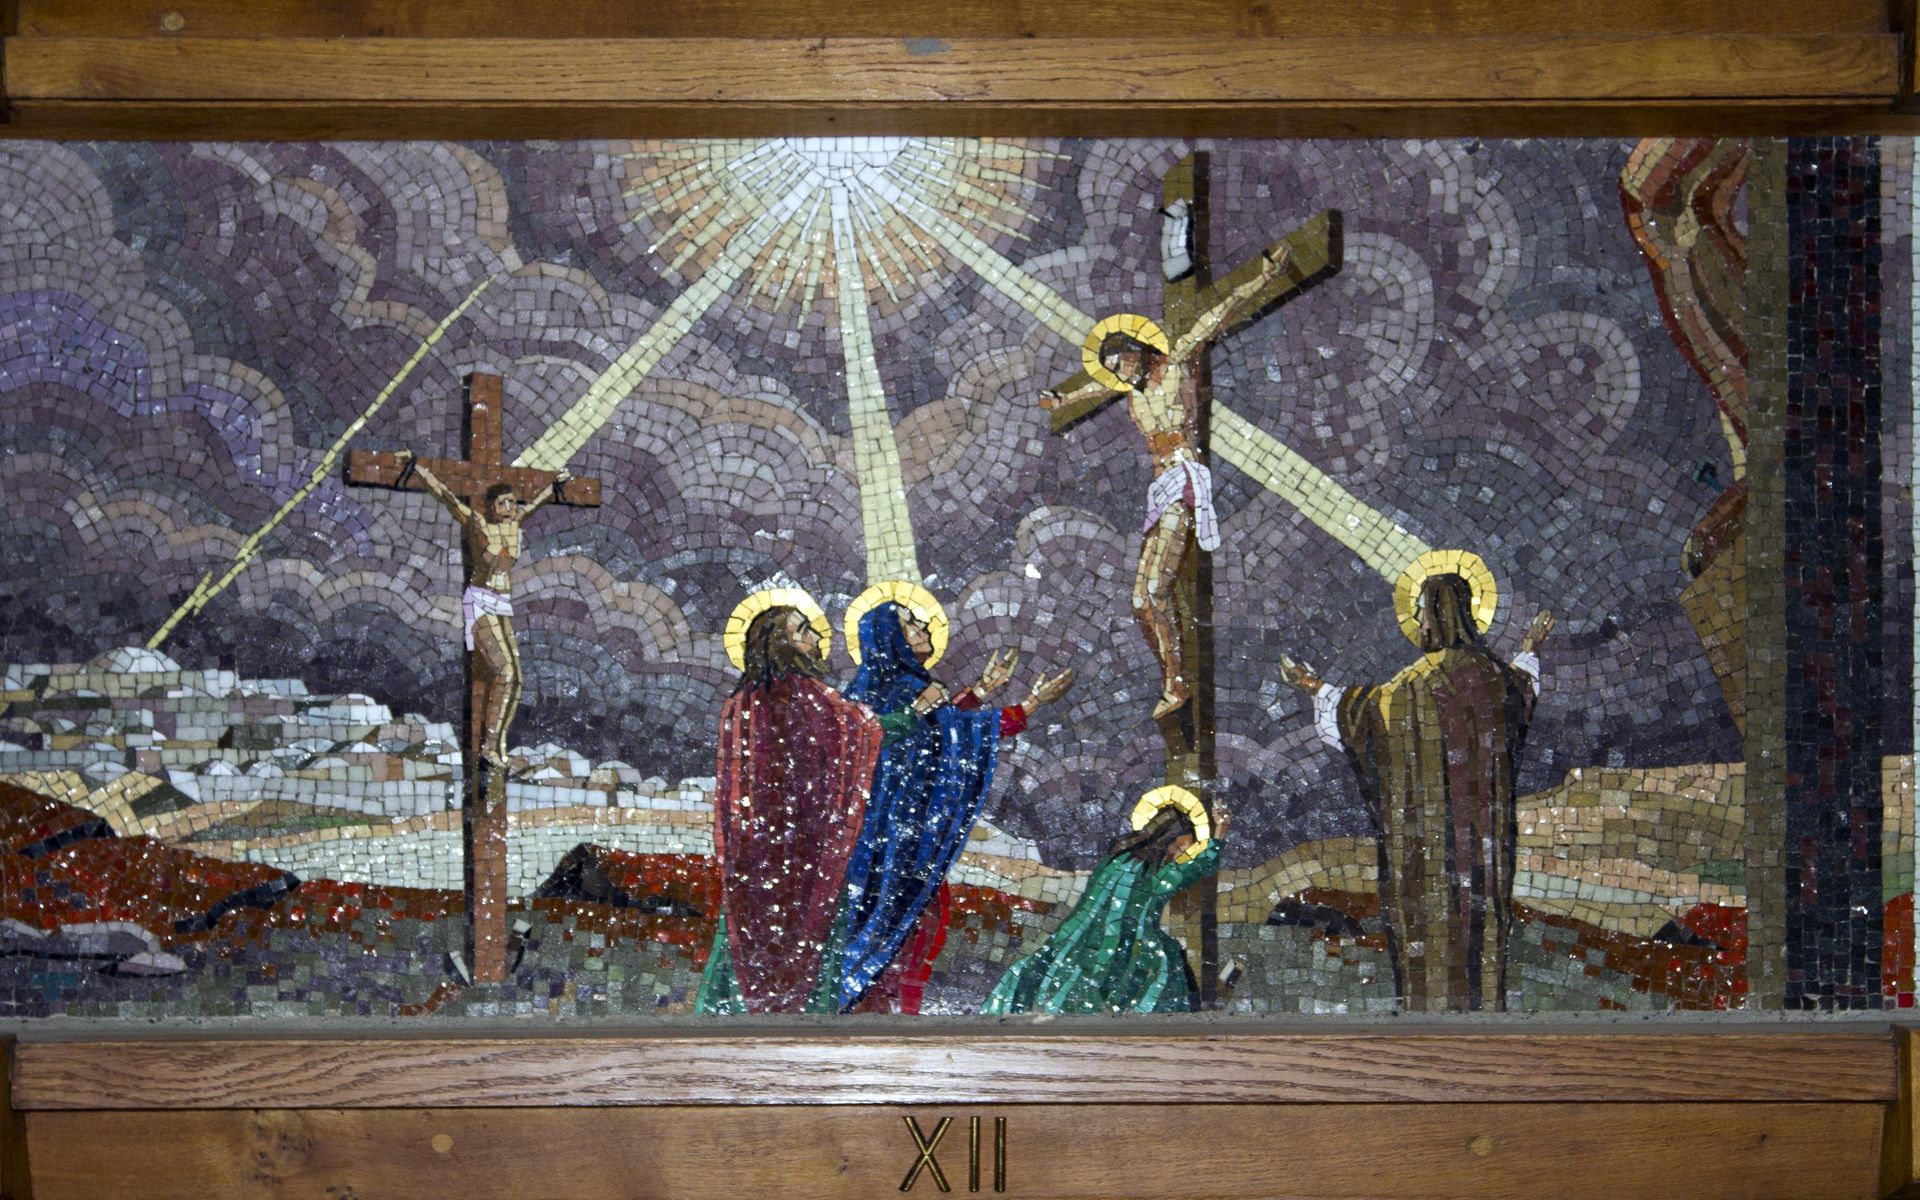 A painting of jesus on the cross with three people standing around him.